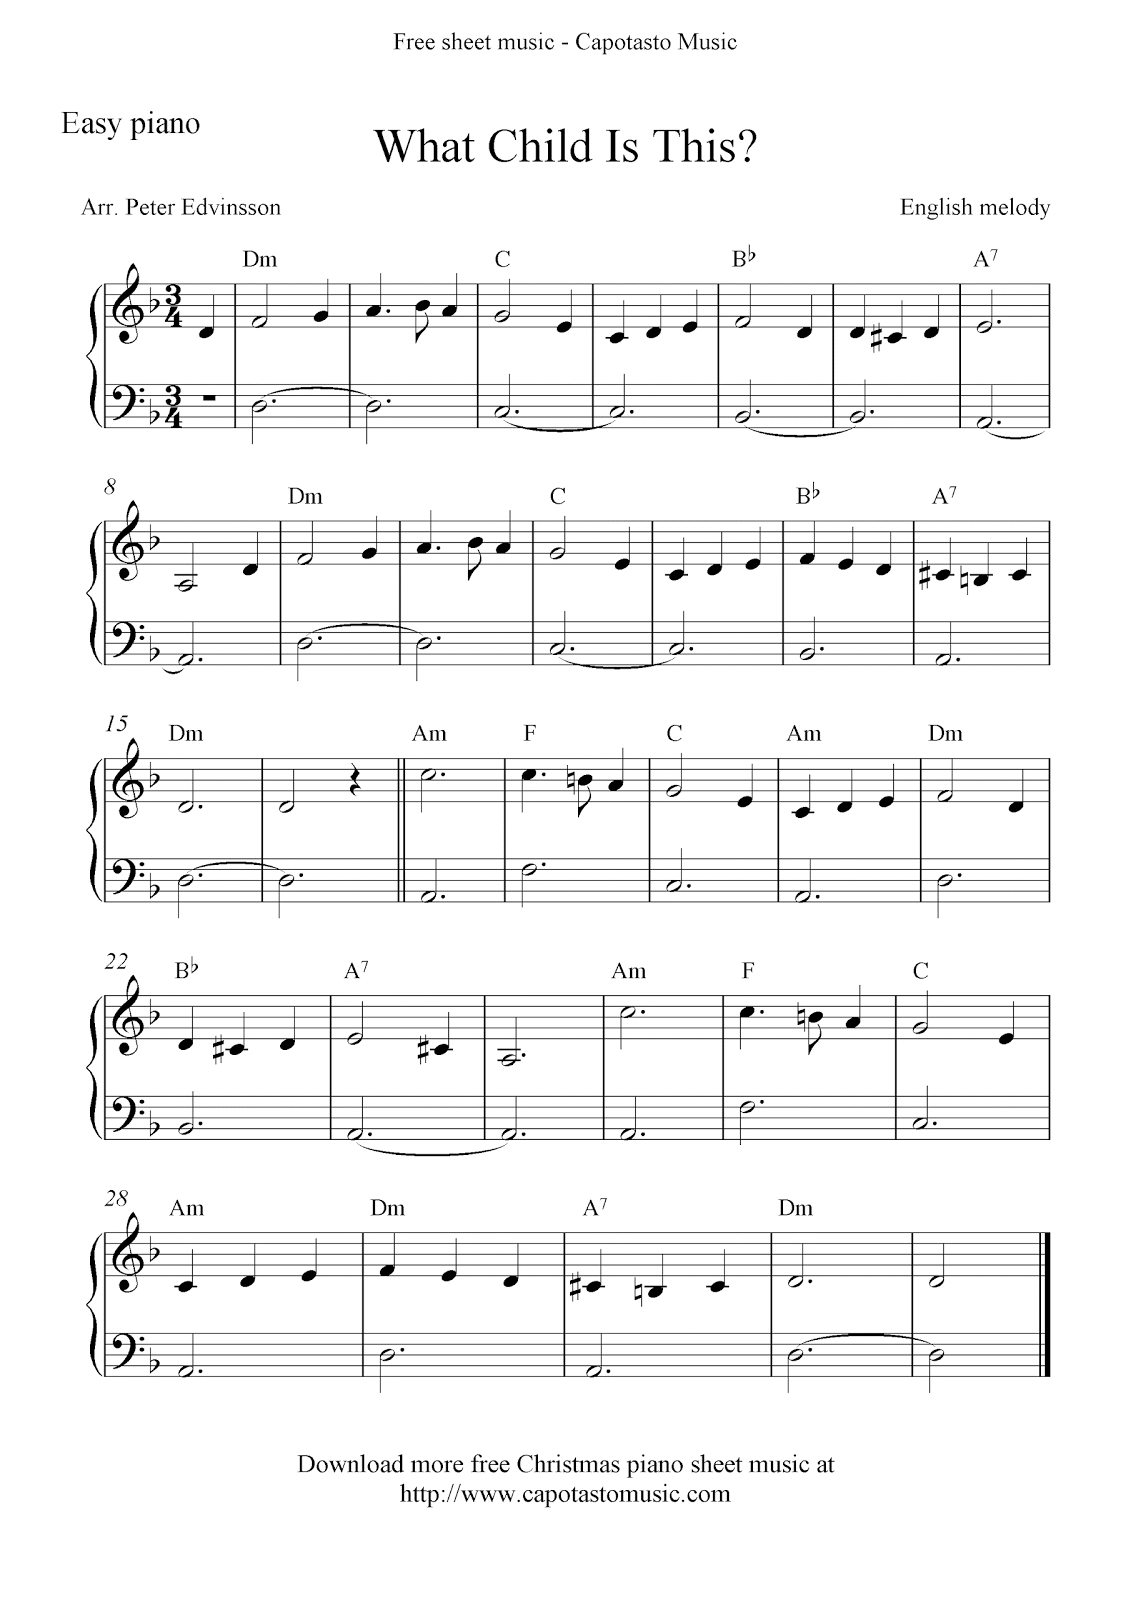 Easy Piano Solo Arrangementpeter Edvinsson Of The Christmas - Free Printable Christmas Sheet Music For Piano